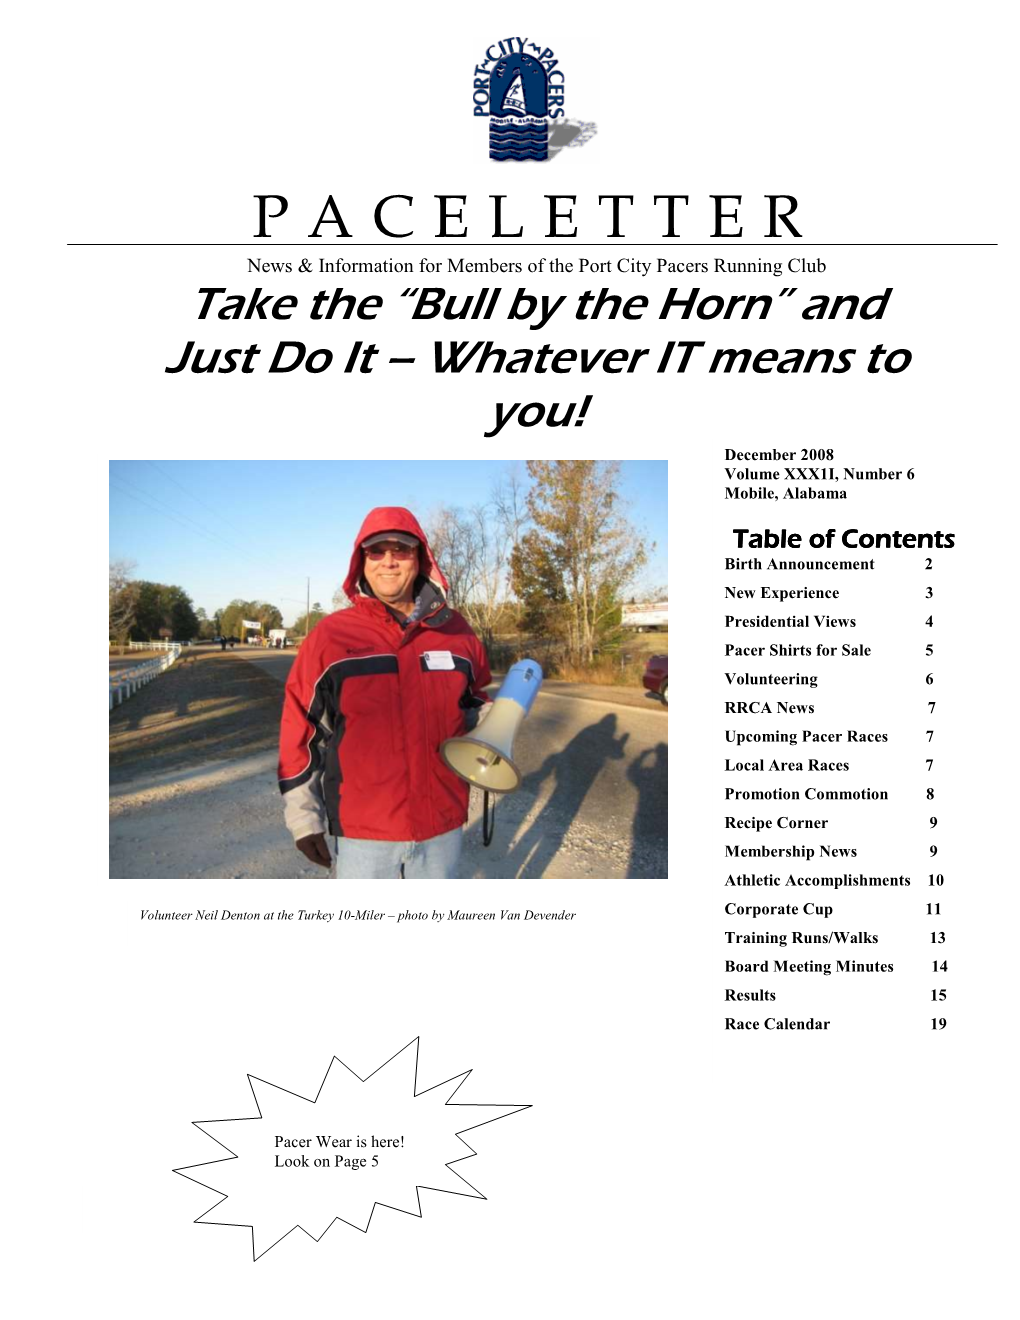 PACELETTER News & Information for Members of the Port City Pacers Running Club Take the “Bull by the Horn” and Just Do It – Whatever IT Means to You!